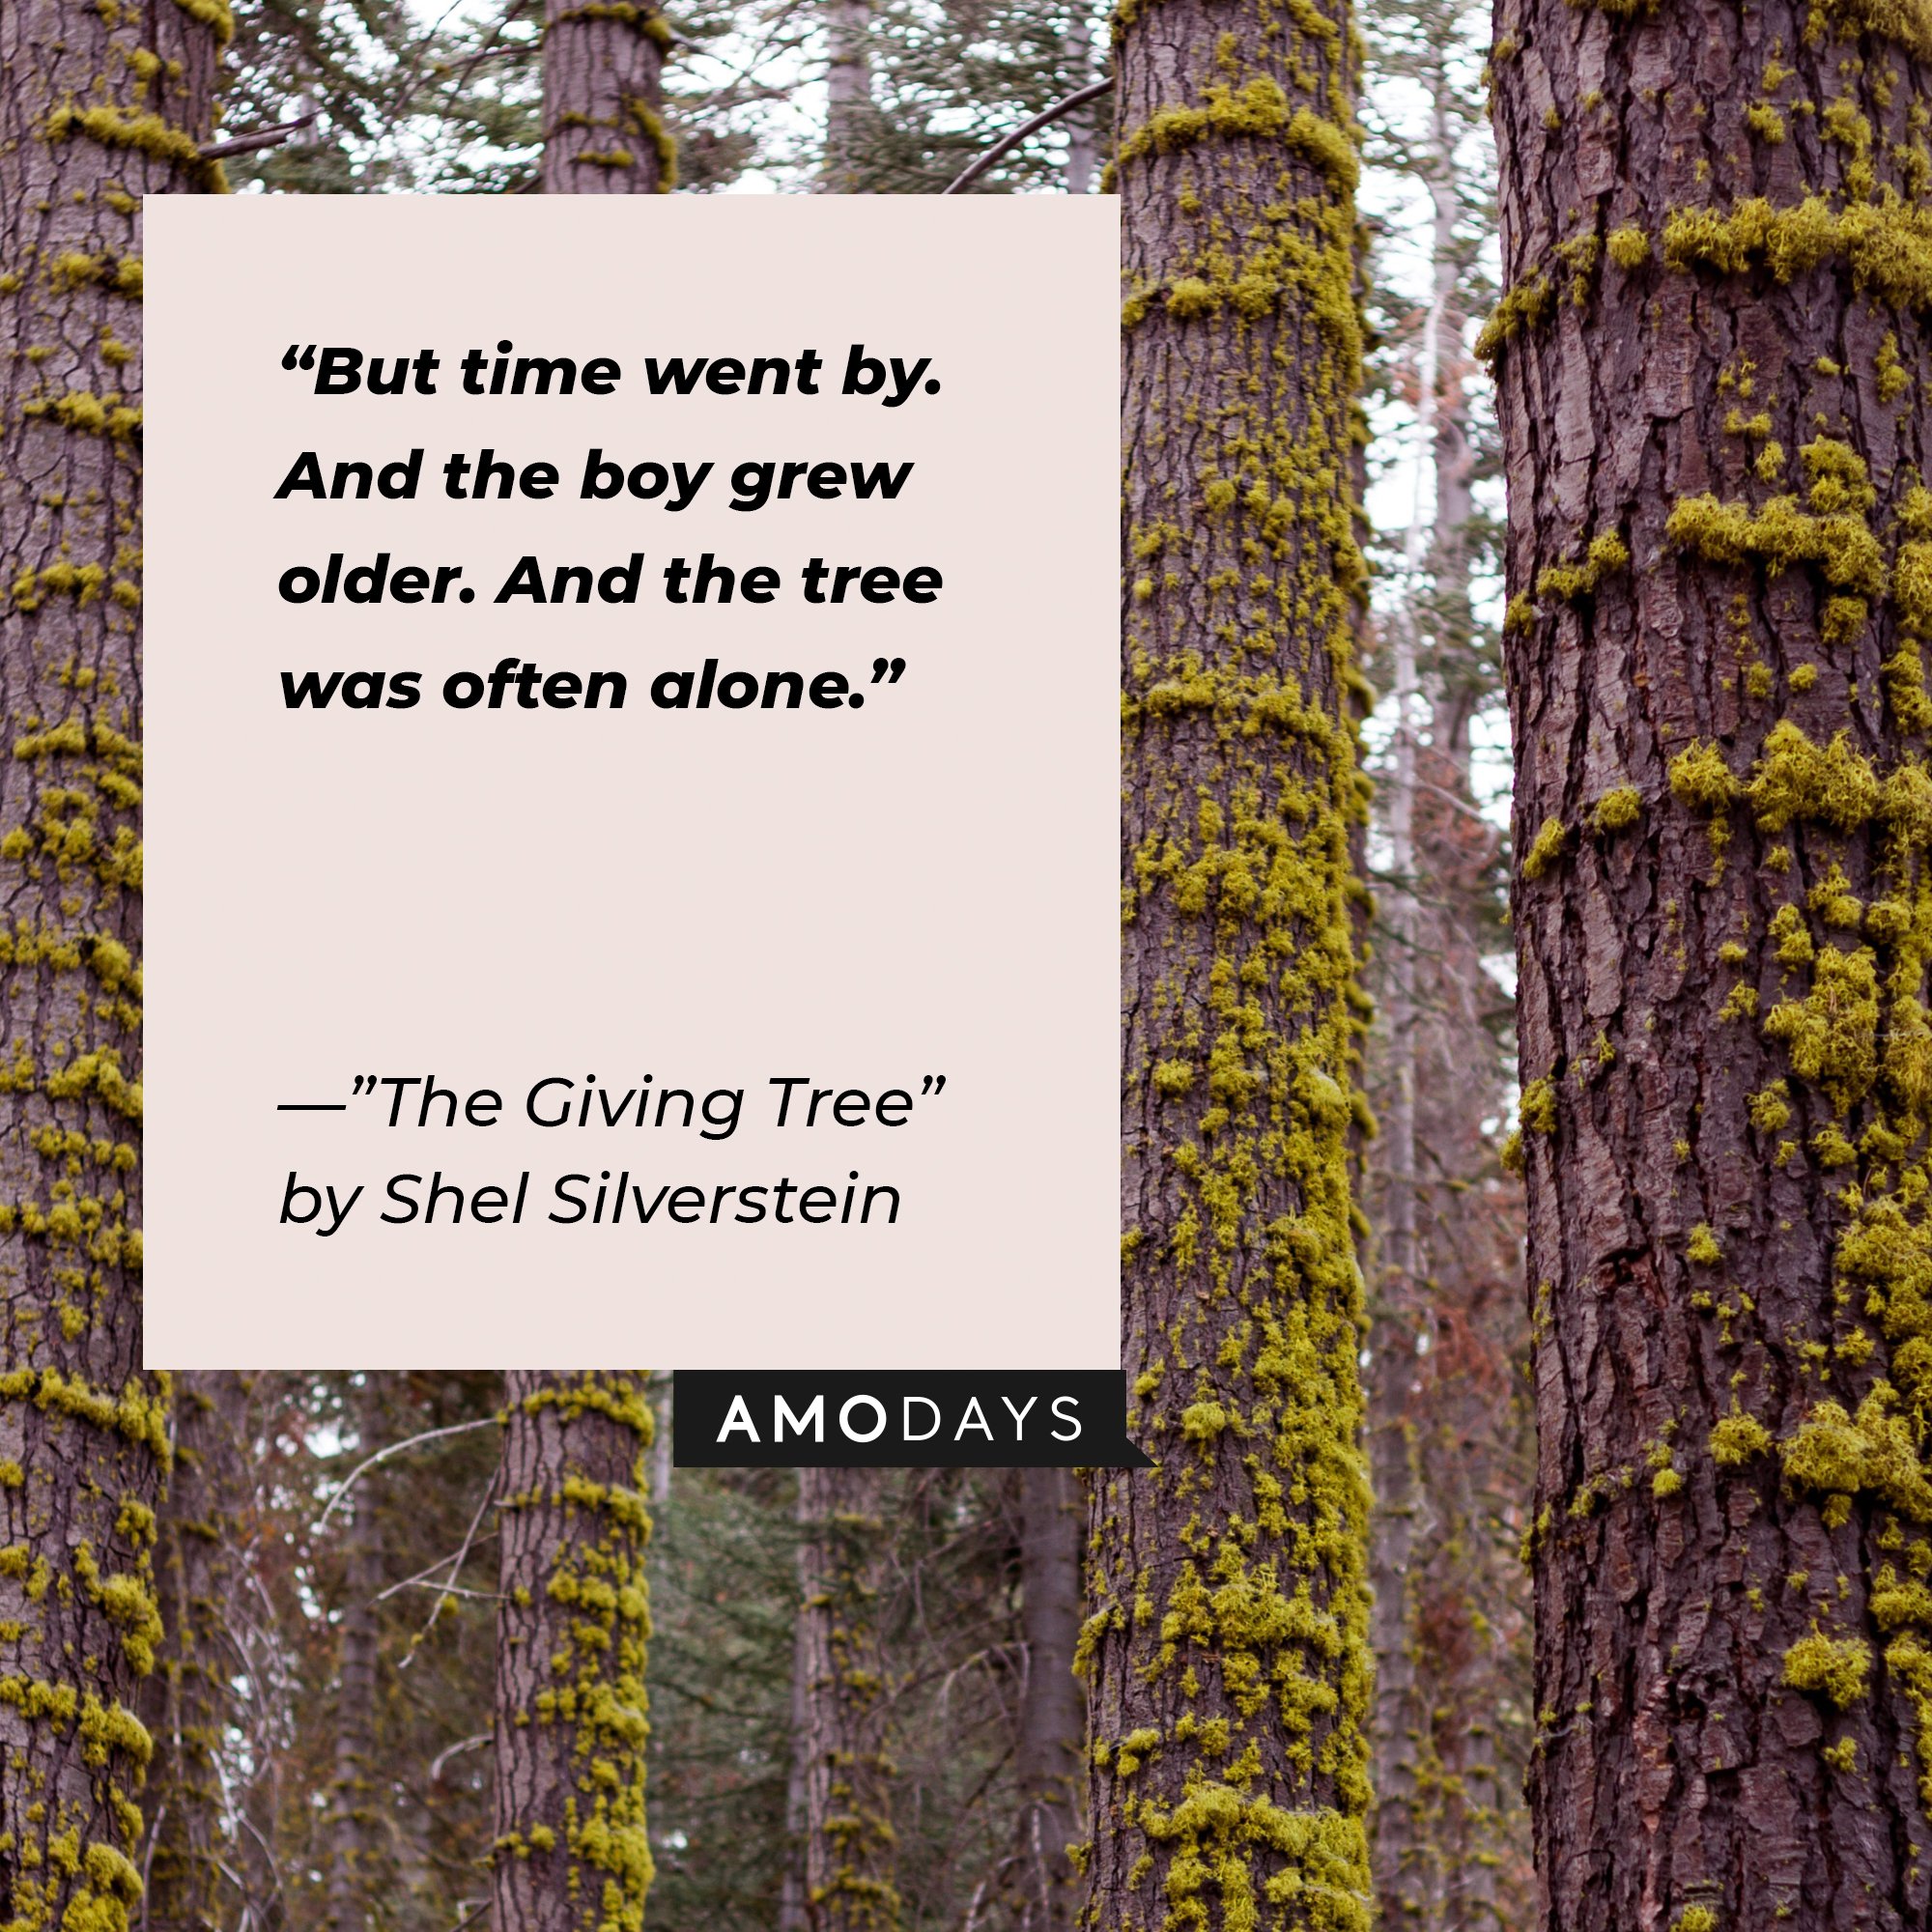 Quotes from Shel Silverstein’s "Giving Tree”: "But time went by. And the boy grew older. And the tree was often alone." | Image: AmoDays